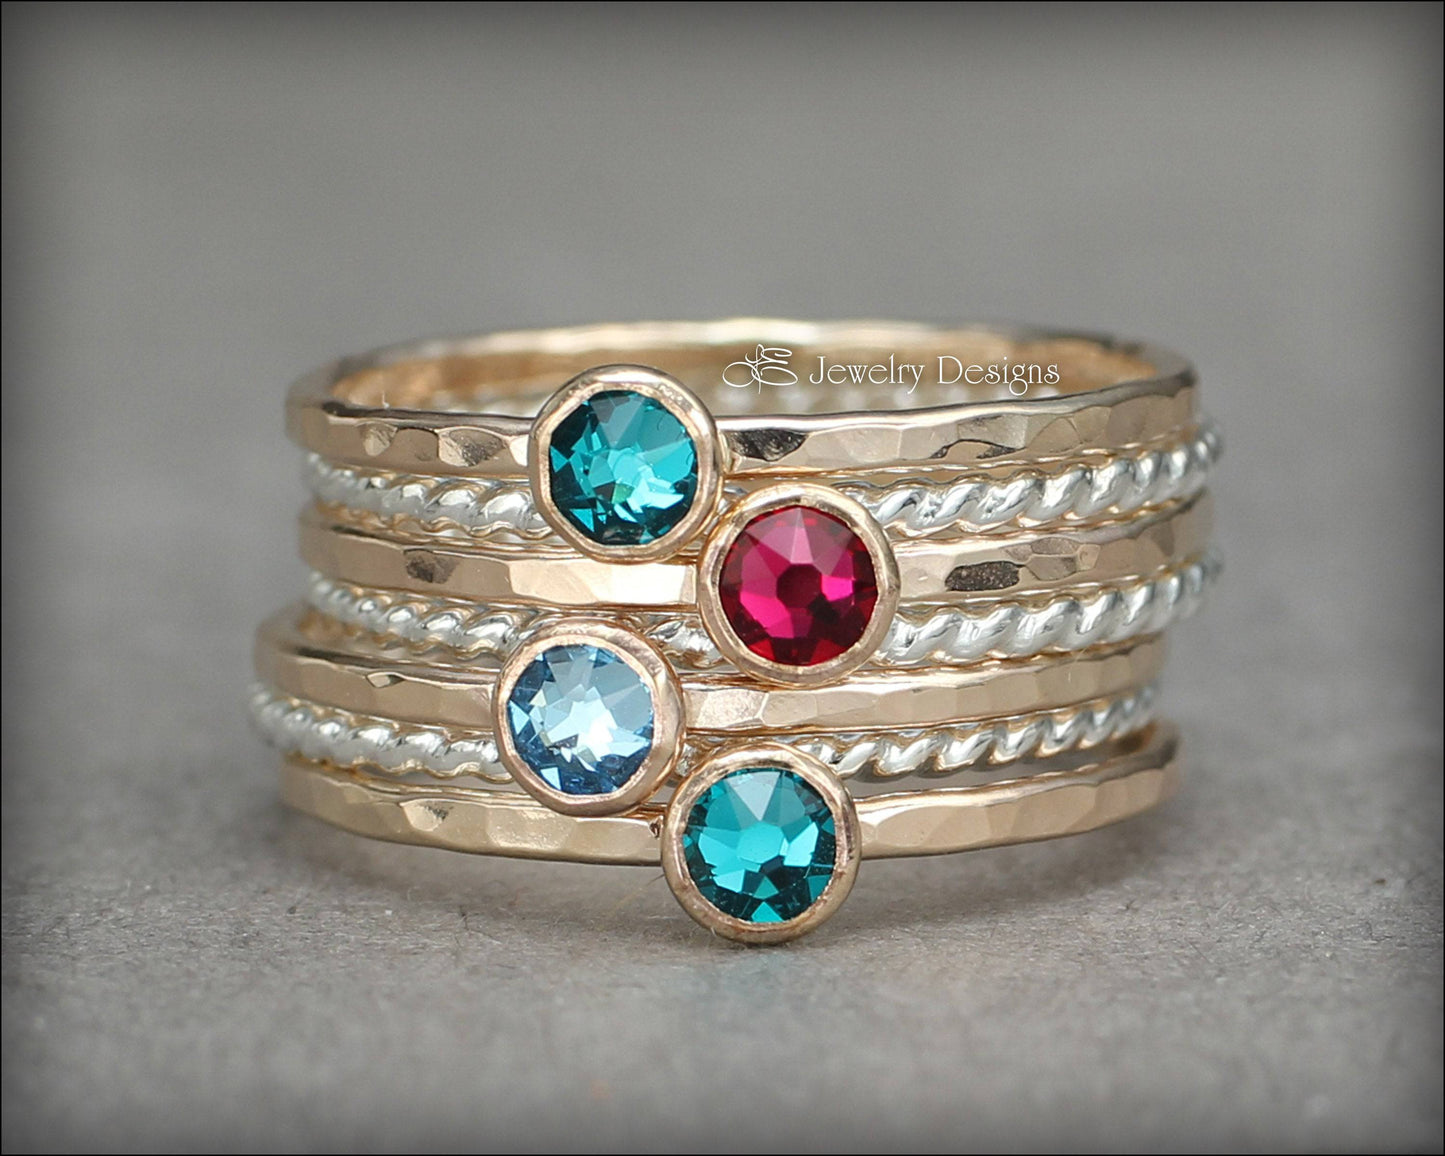 Load image into Gallery viewer, Birthstone Ring Set - (with 4 birthstones) - LE Jewelry Designs
